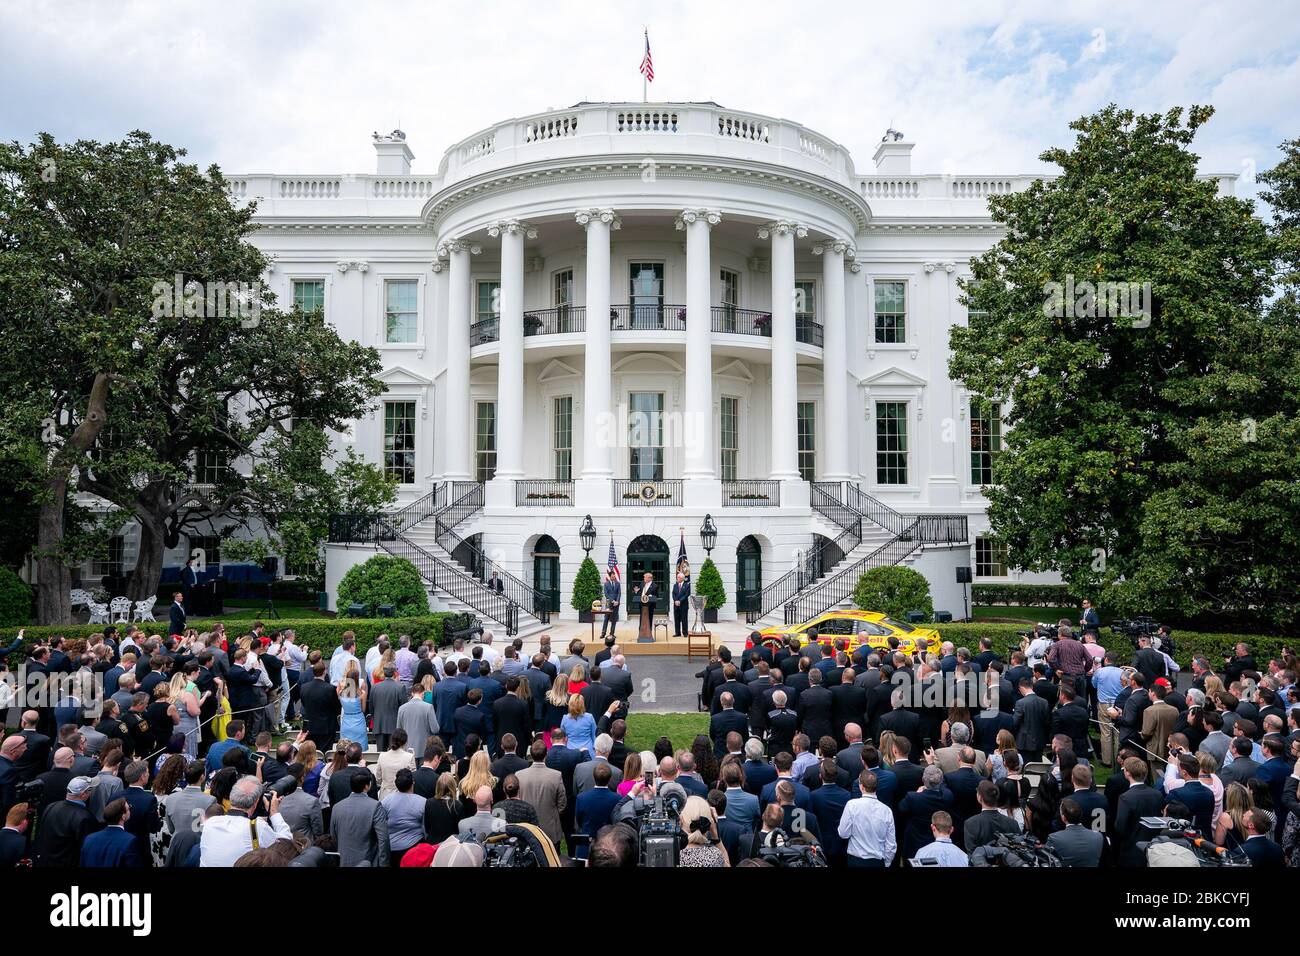 The 2018 NASCAR Cup Series Champion: Joey Logano Visits the White House  Stock Photo - Alamy